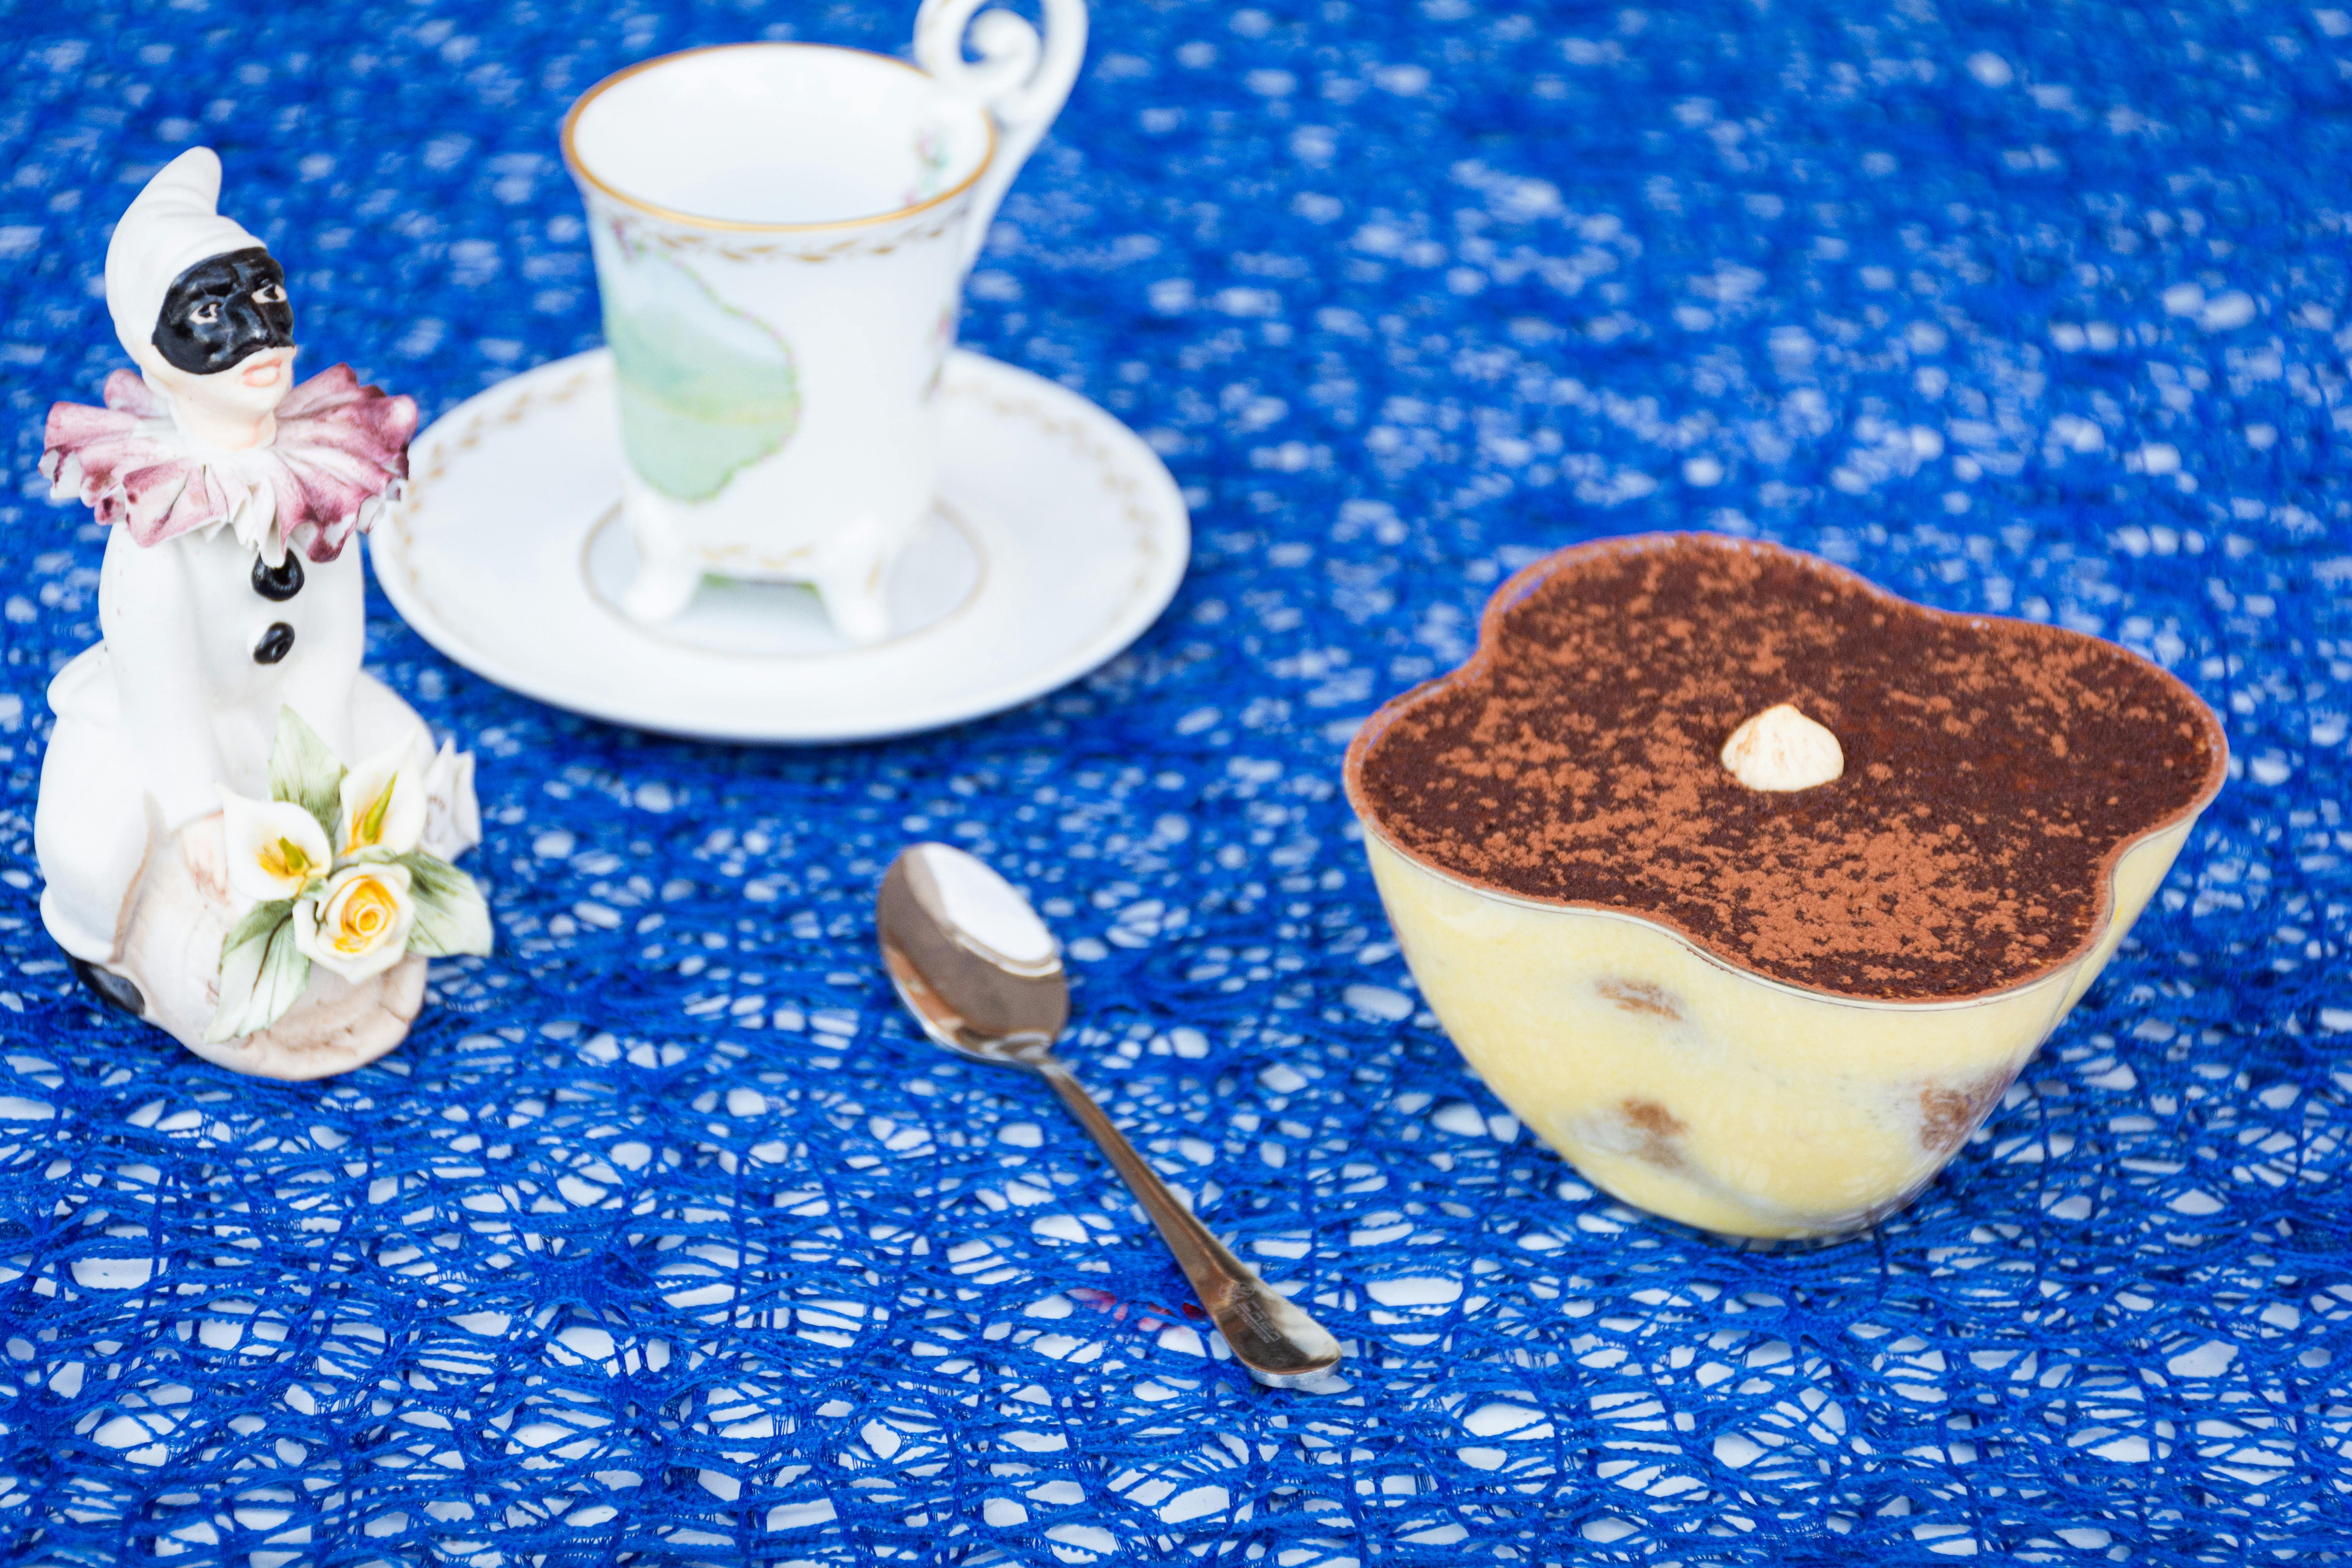 Tiramisù on the table with a cup of coffee